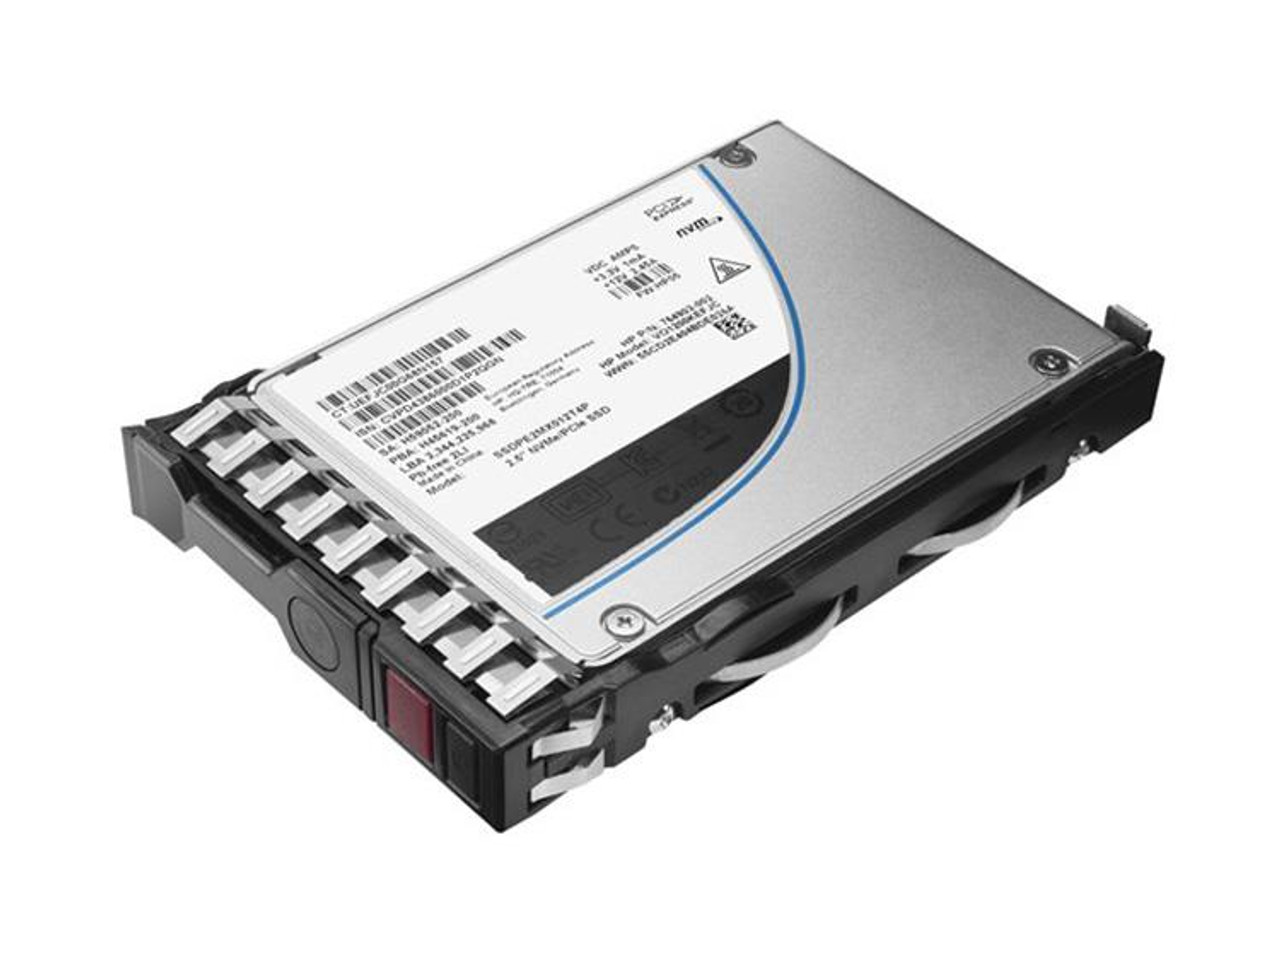 866615-005 HPE 3.84TB TLC SATA 6Gbps Hot Swap Read Intensive 2.5-inch Internal Solid State Drive (SSD) with Smart Carrier